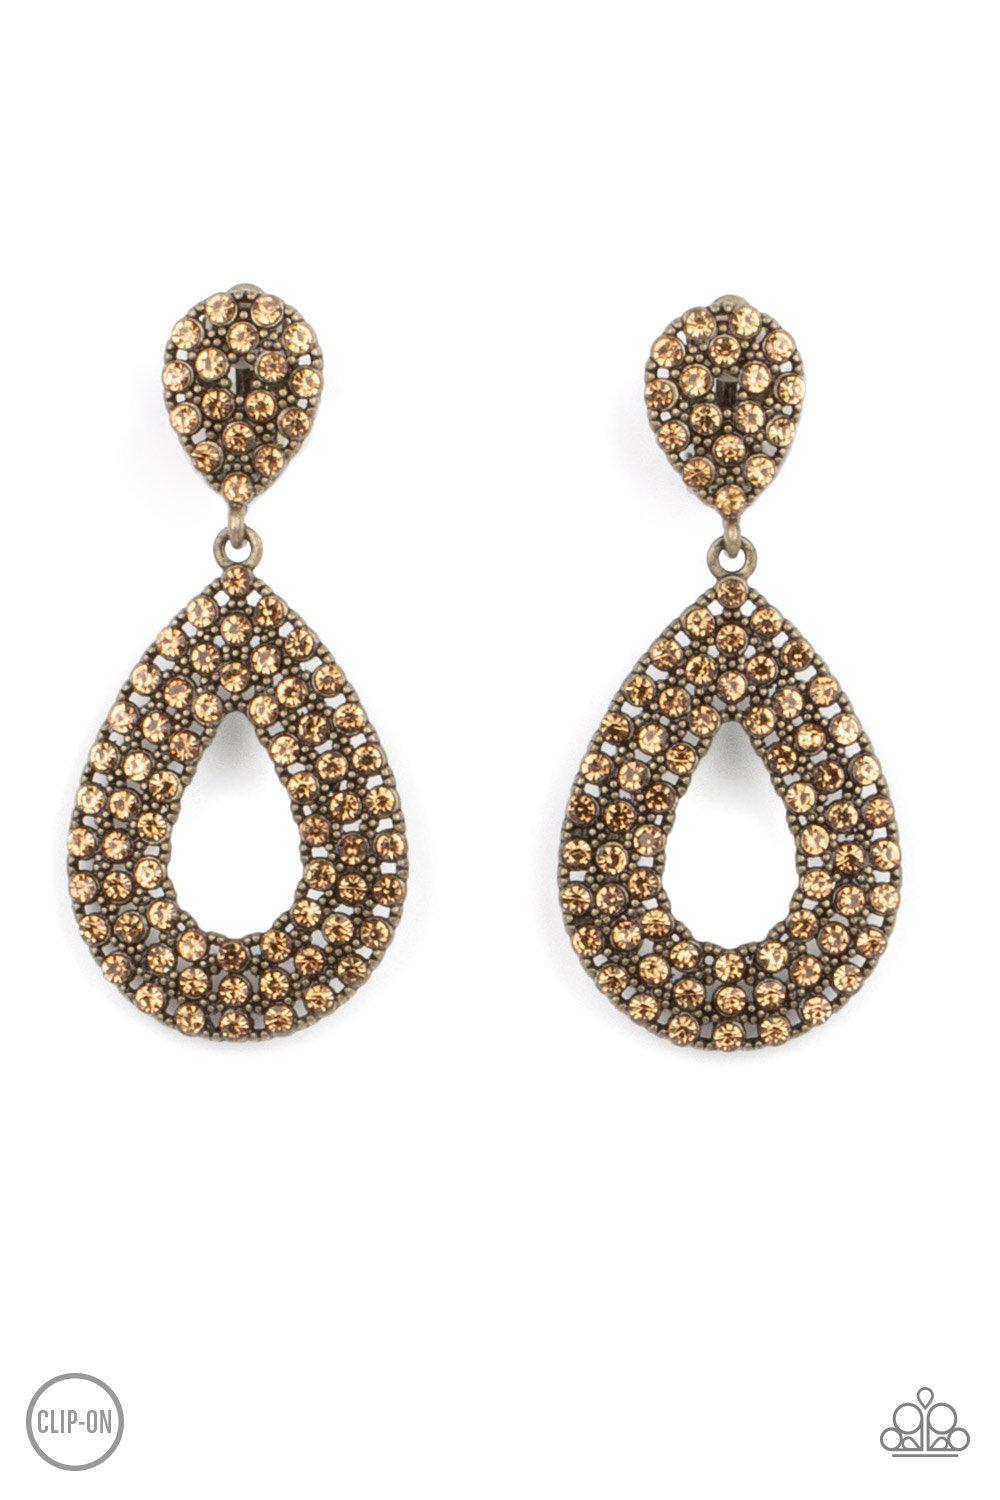 Pack In The Pizzazz Brass Rhinestone Clip-On Earrings - Paparazzi Accessories- lightbox - CarasShop.com - $5 Jewelry by Cara Jewels